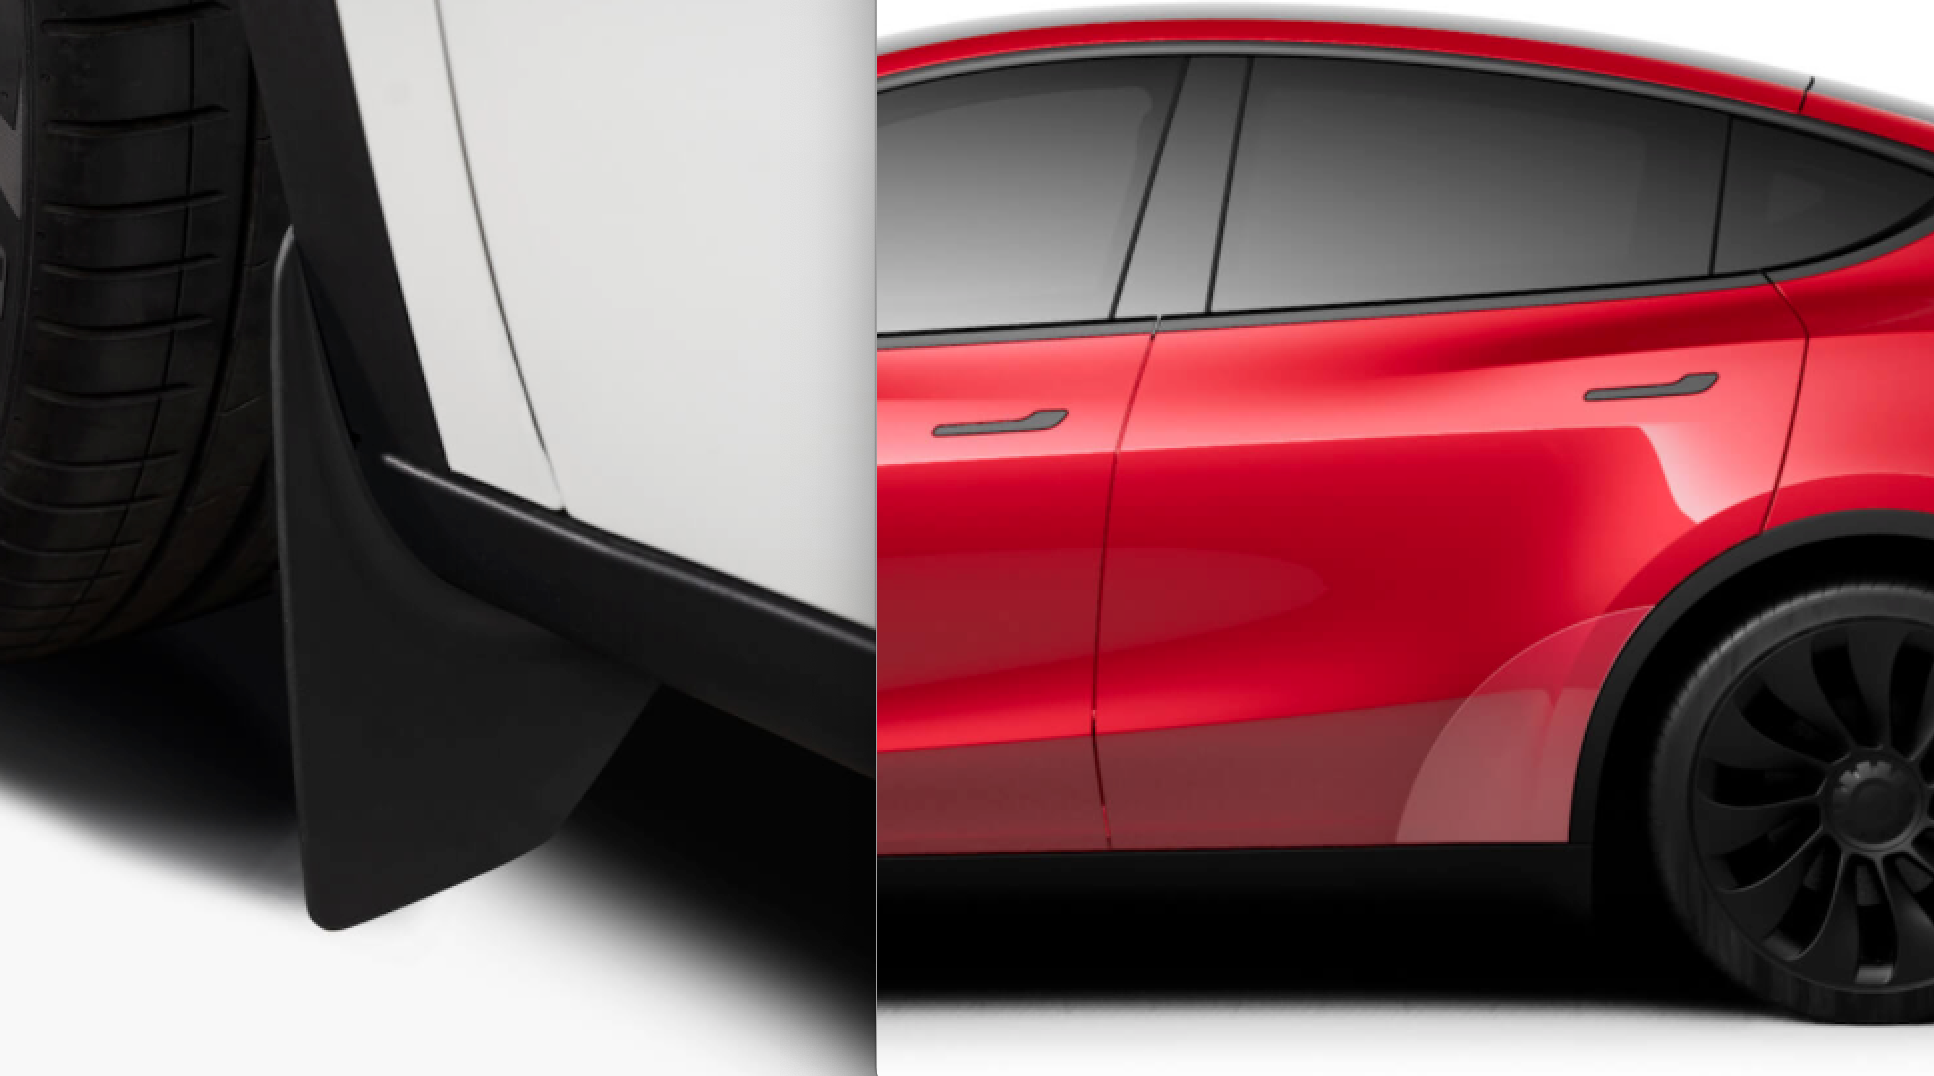 Tesla Mud Flaps With PPF To Protect Your Paint - TESBROS BLOG